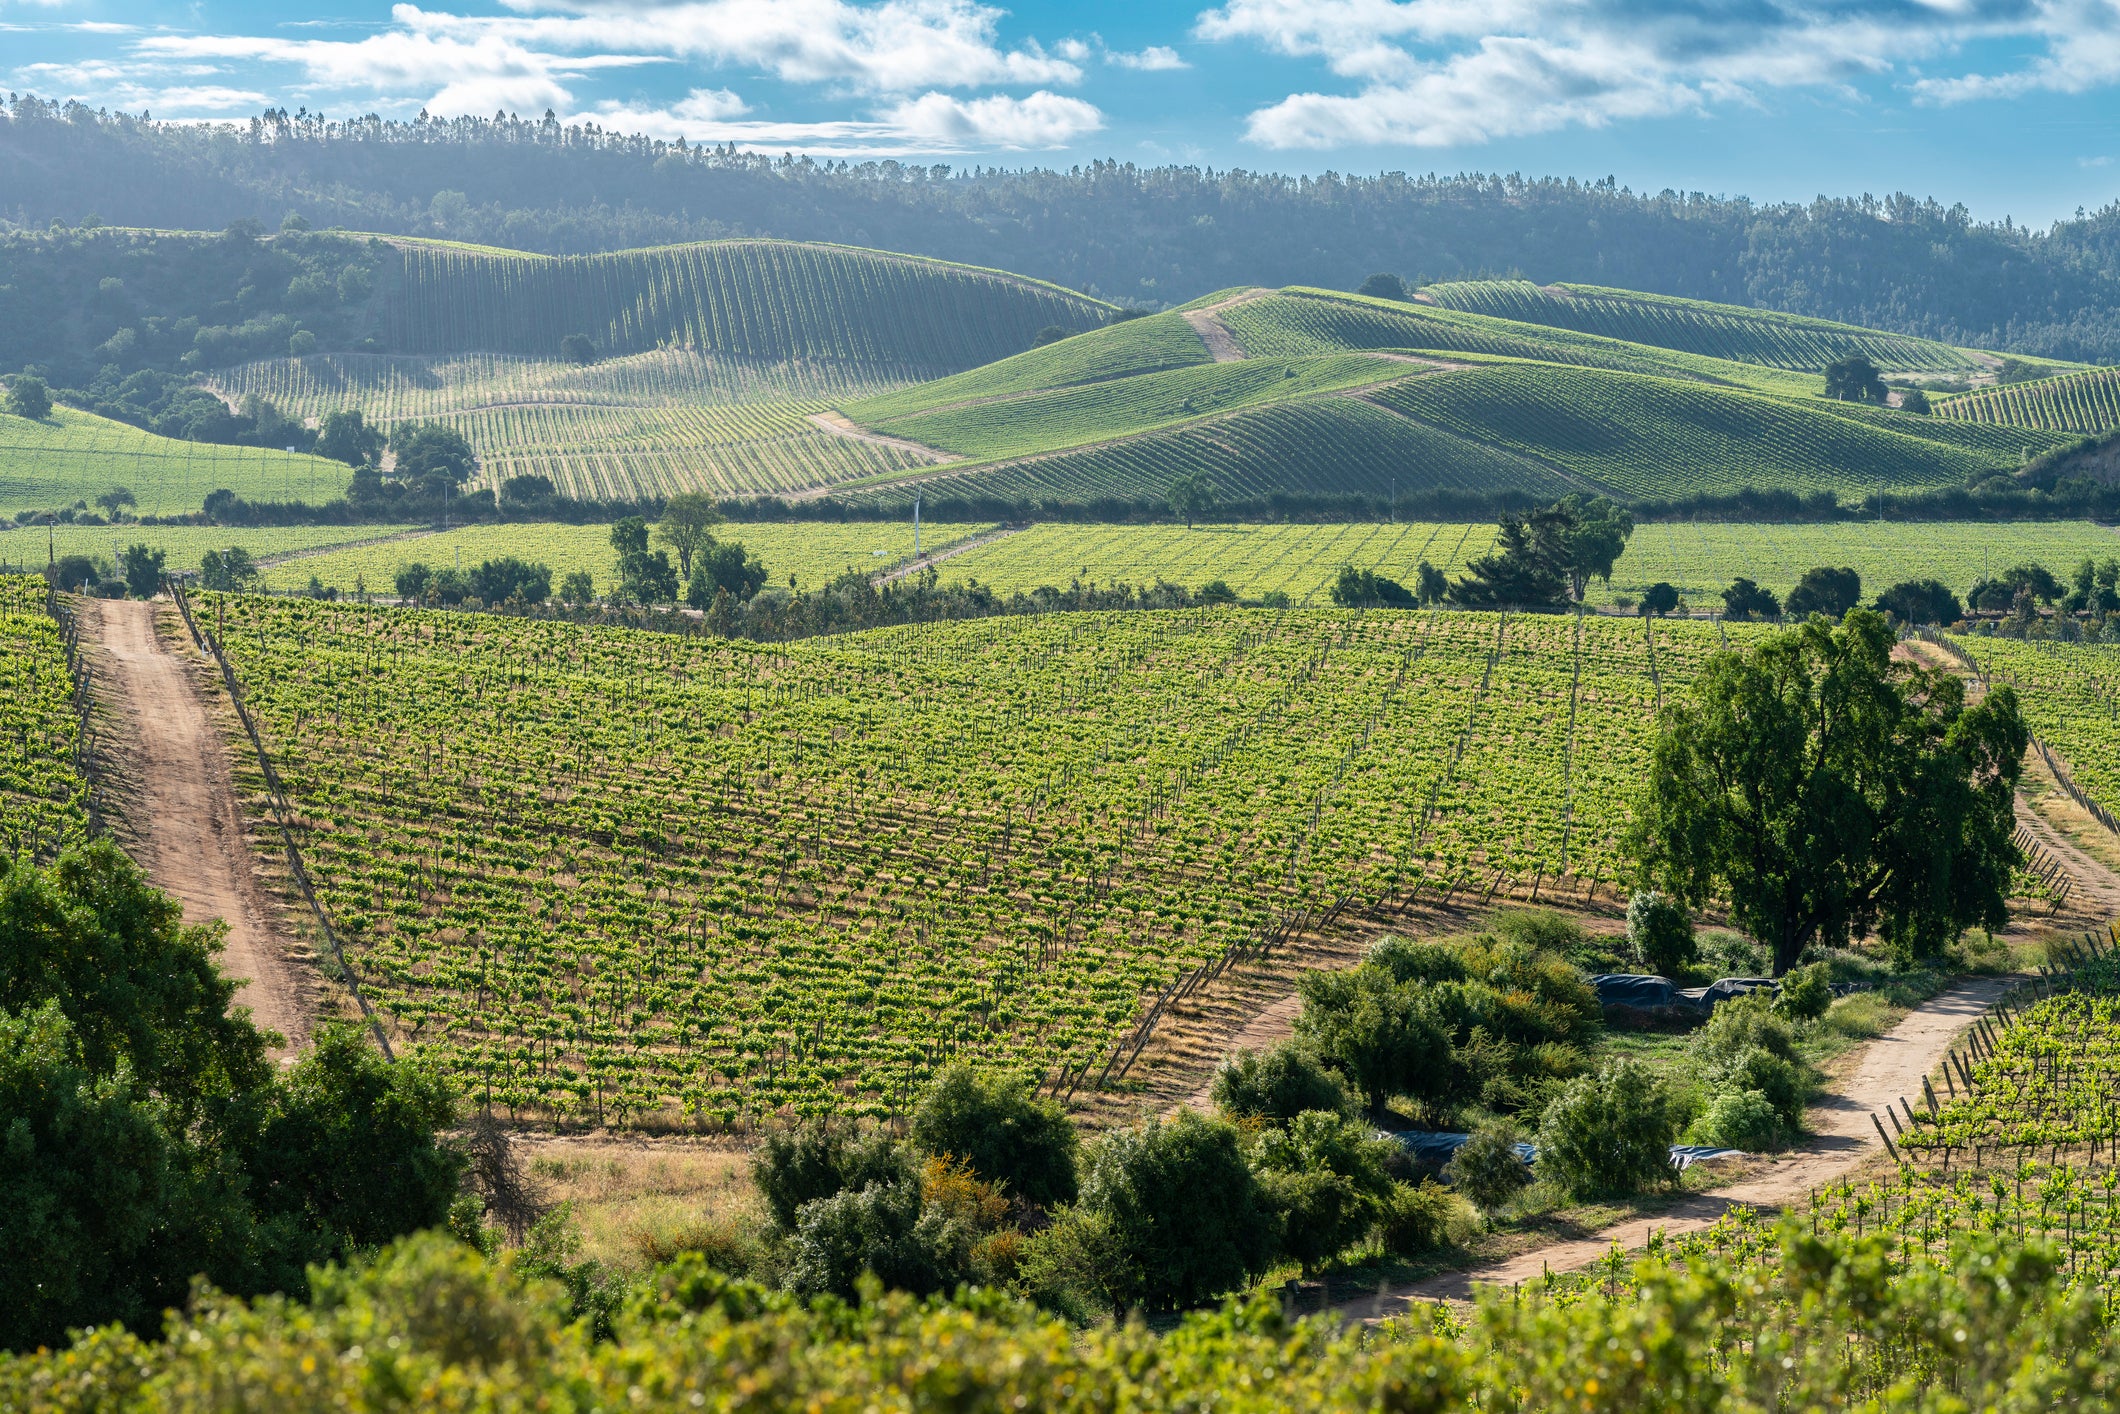 Chile’s best chardonnay and sauvignon blanc is refined in the Casablanca Valley